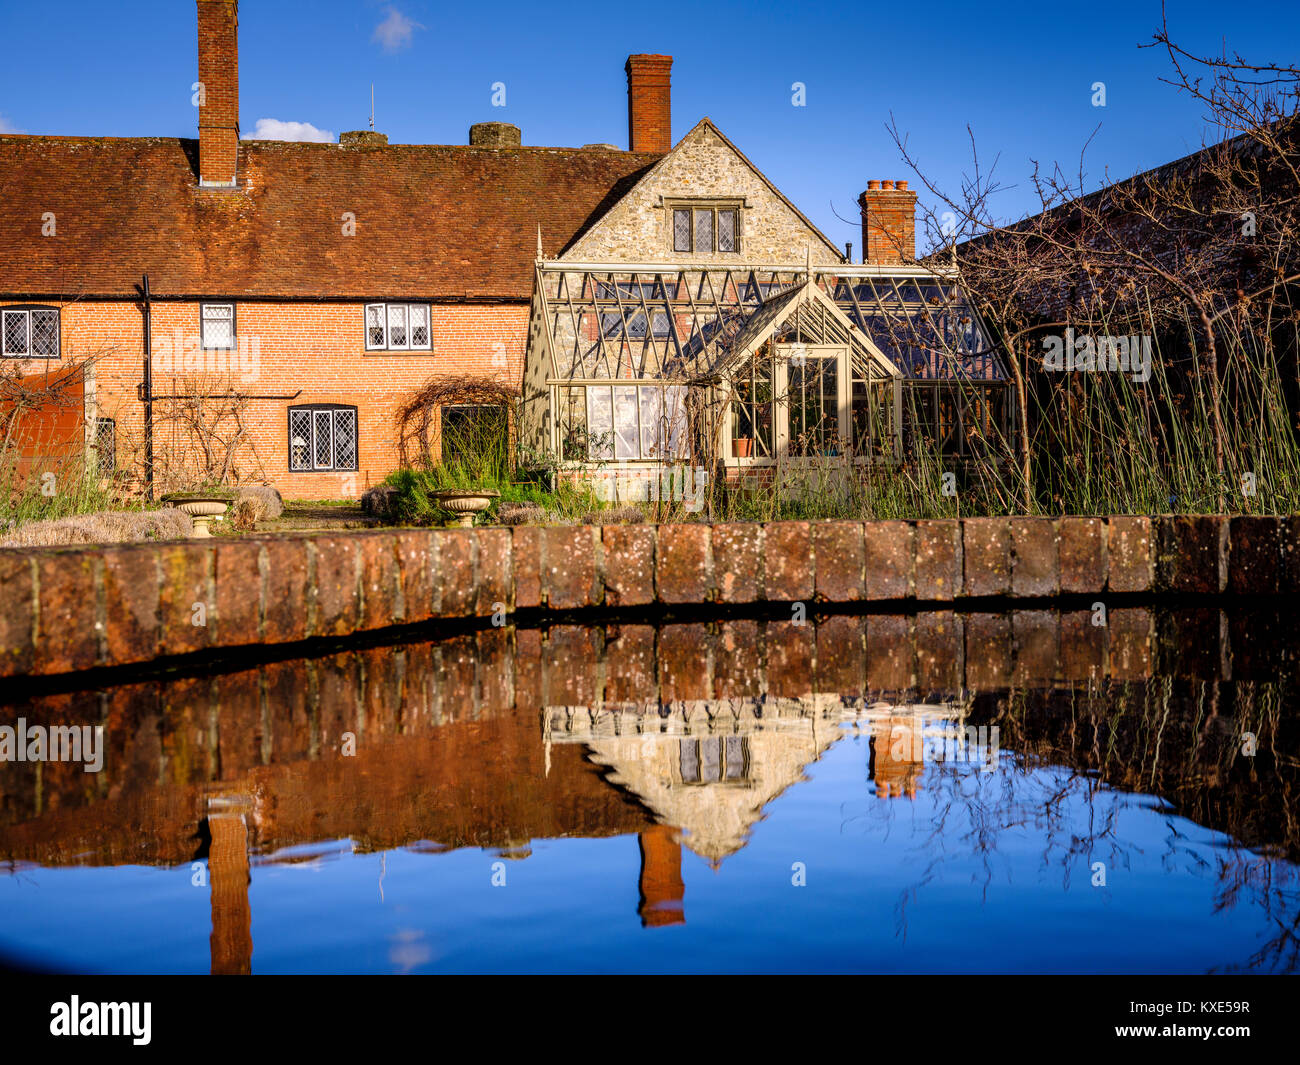 The walled garden at Cowdray Park, Midhurst, West Sussex UK. Stock Photo